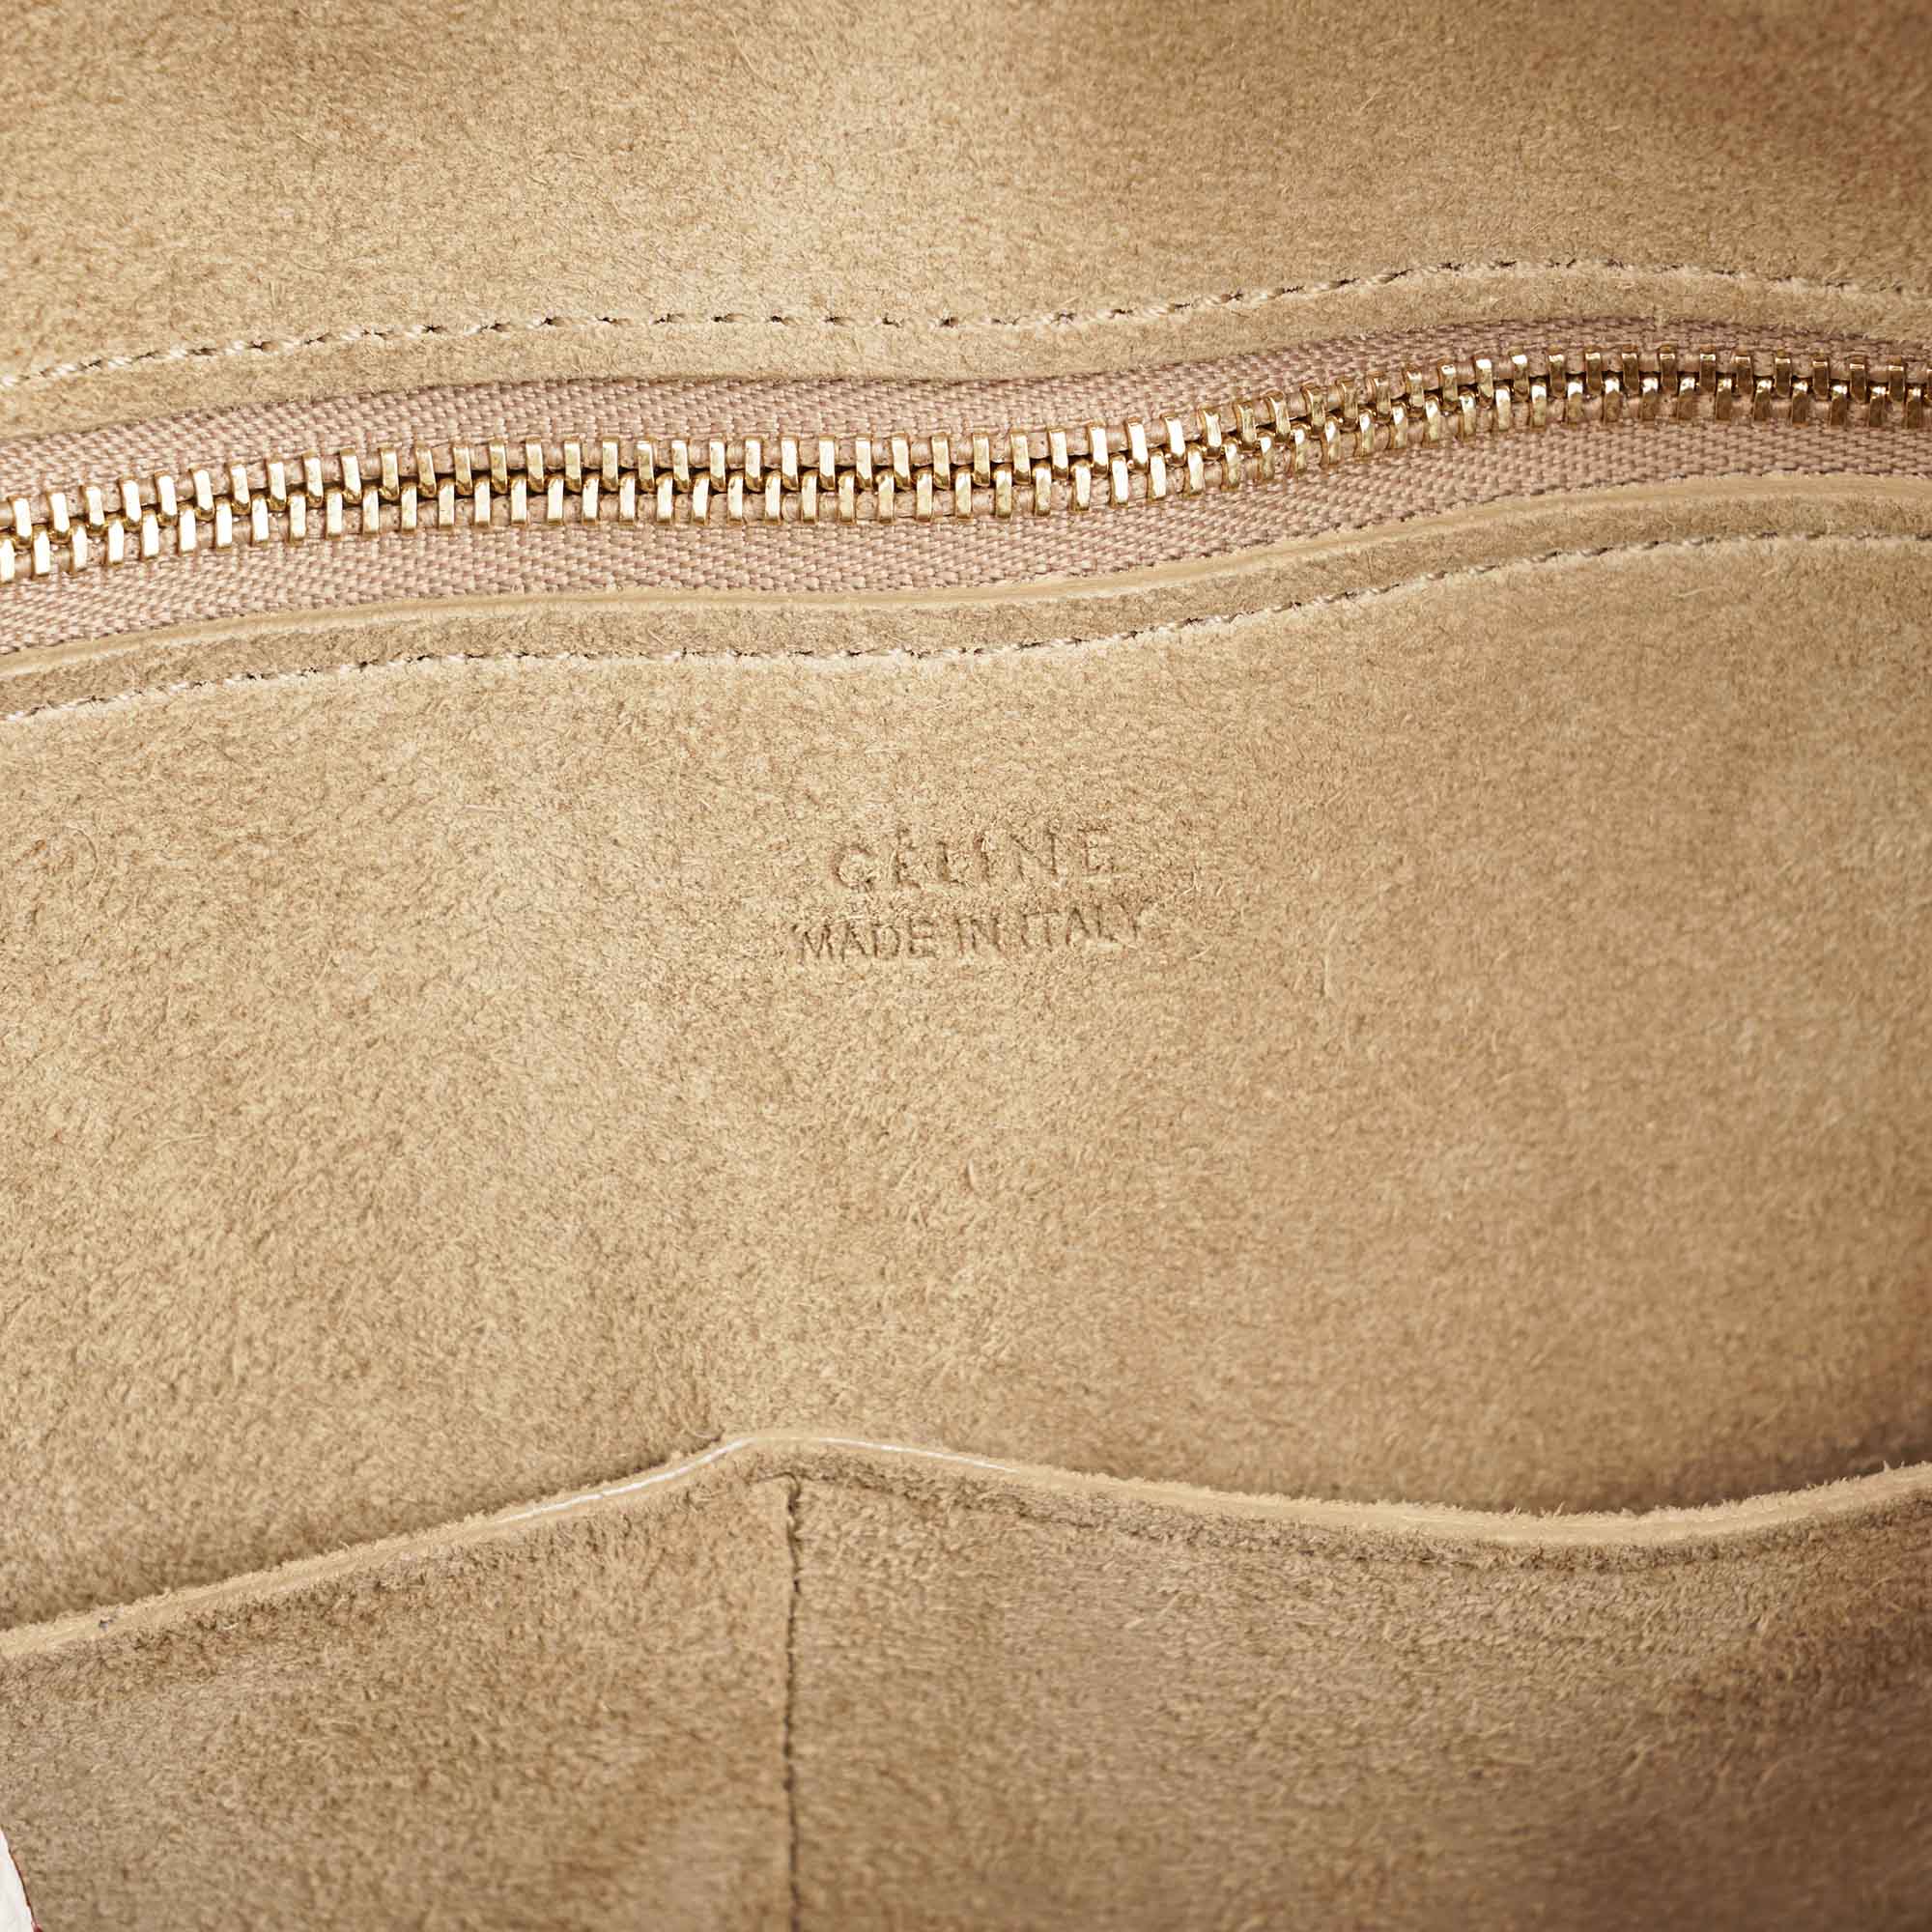 Small Ring Bag - CELINE - Affordable Luxury image